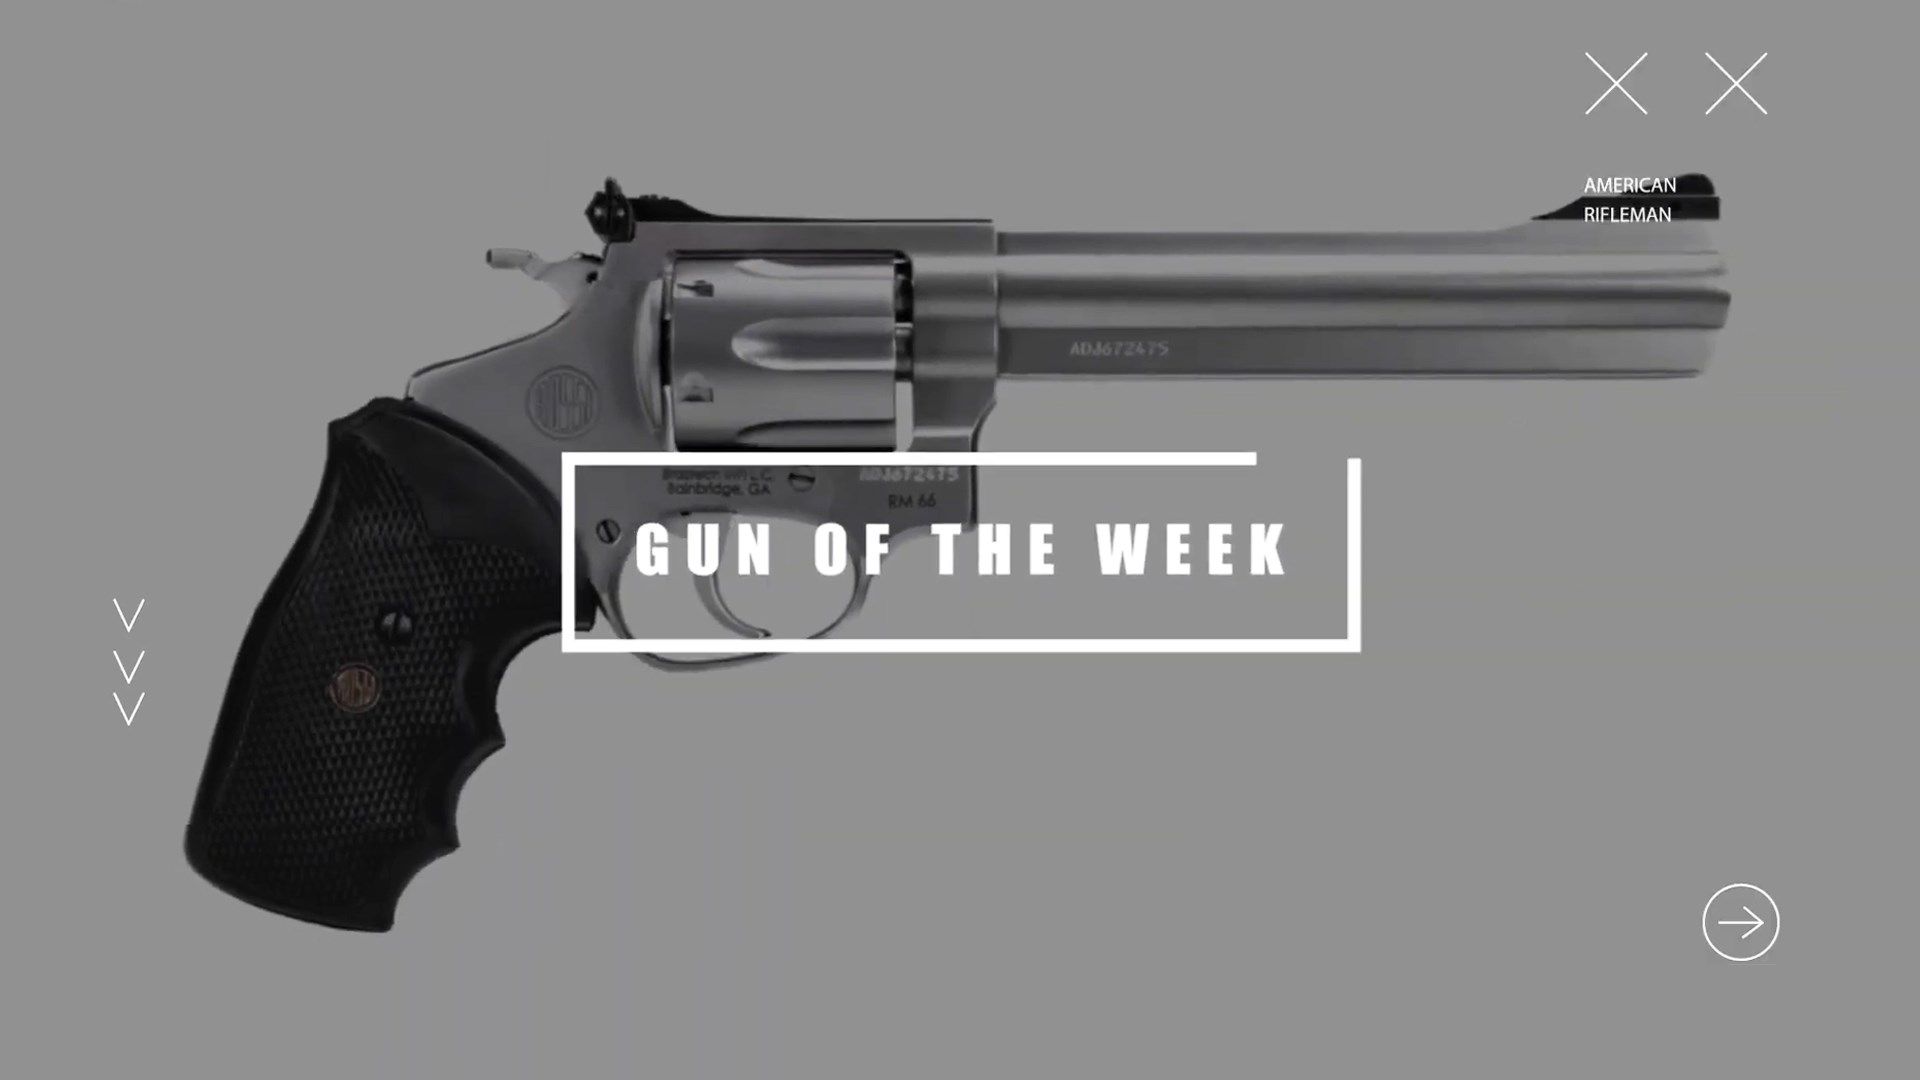 GUN OF THE WEEK AMERICAN RIFLEMAN text on image overlay box over gun revolver rossi usa rm66 stainless steel gun right side view black grips gray background